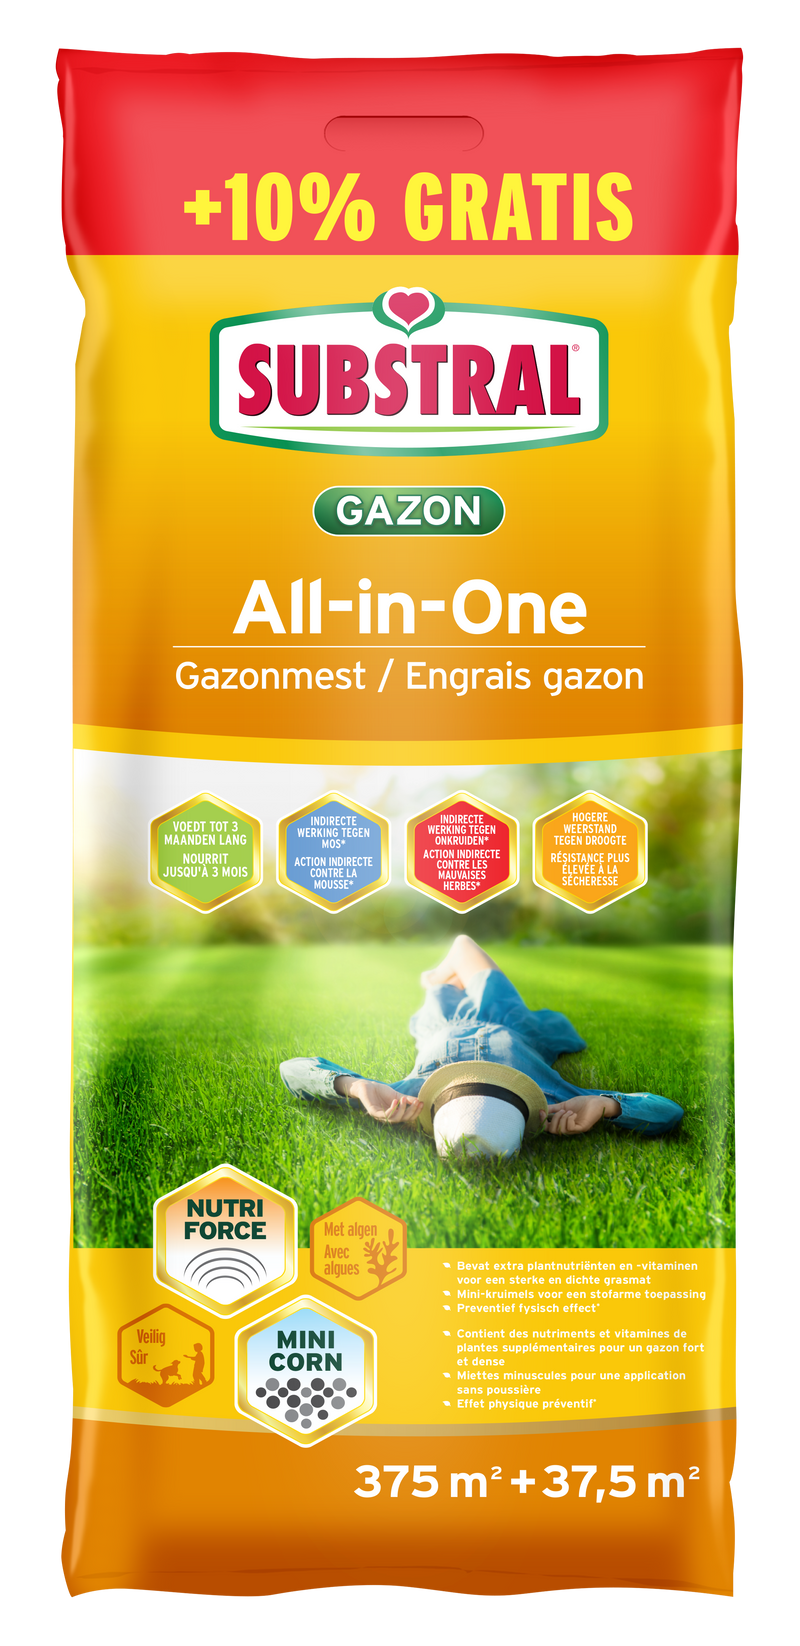 Substral Gazonmest All-in-One 20,5kg